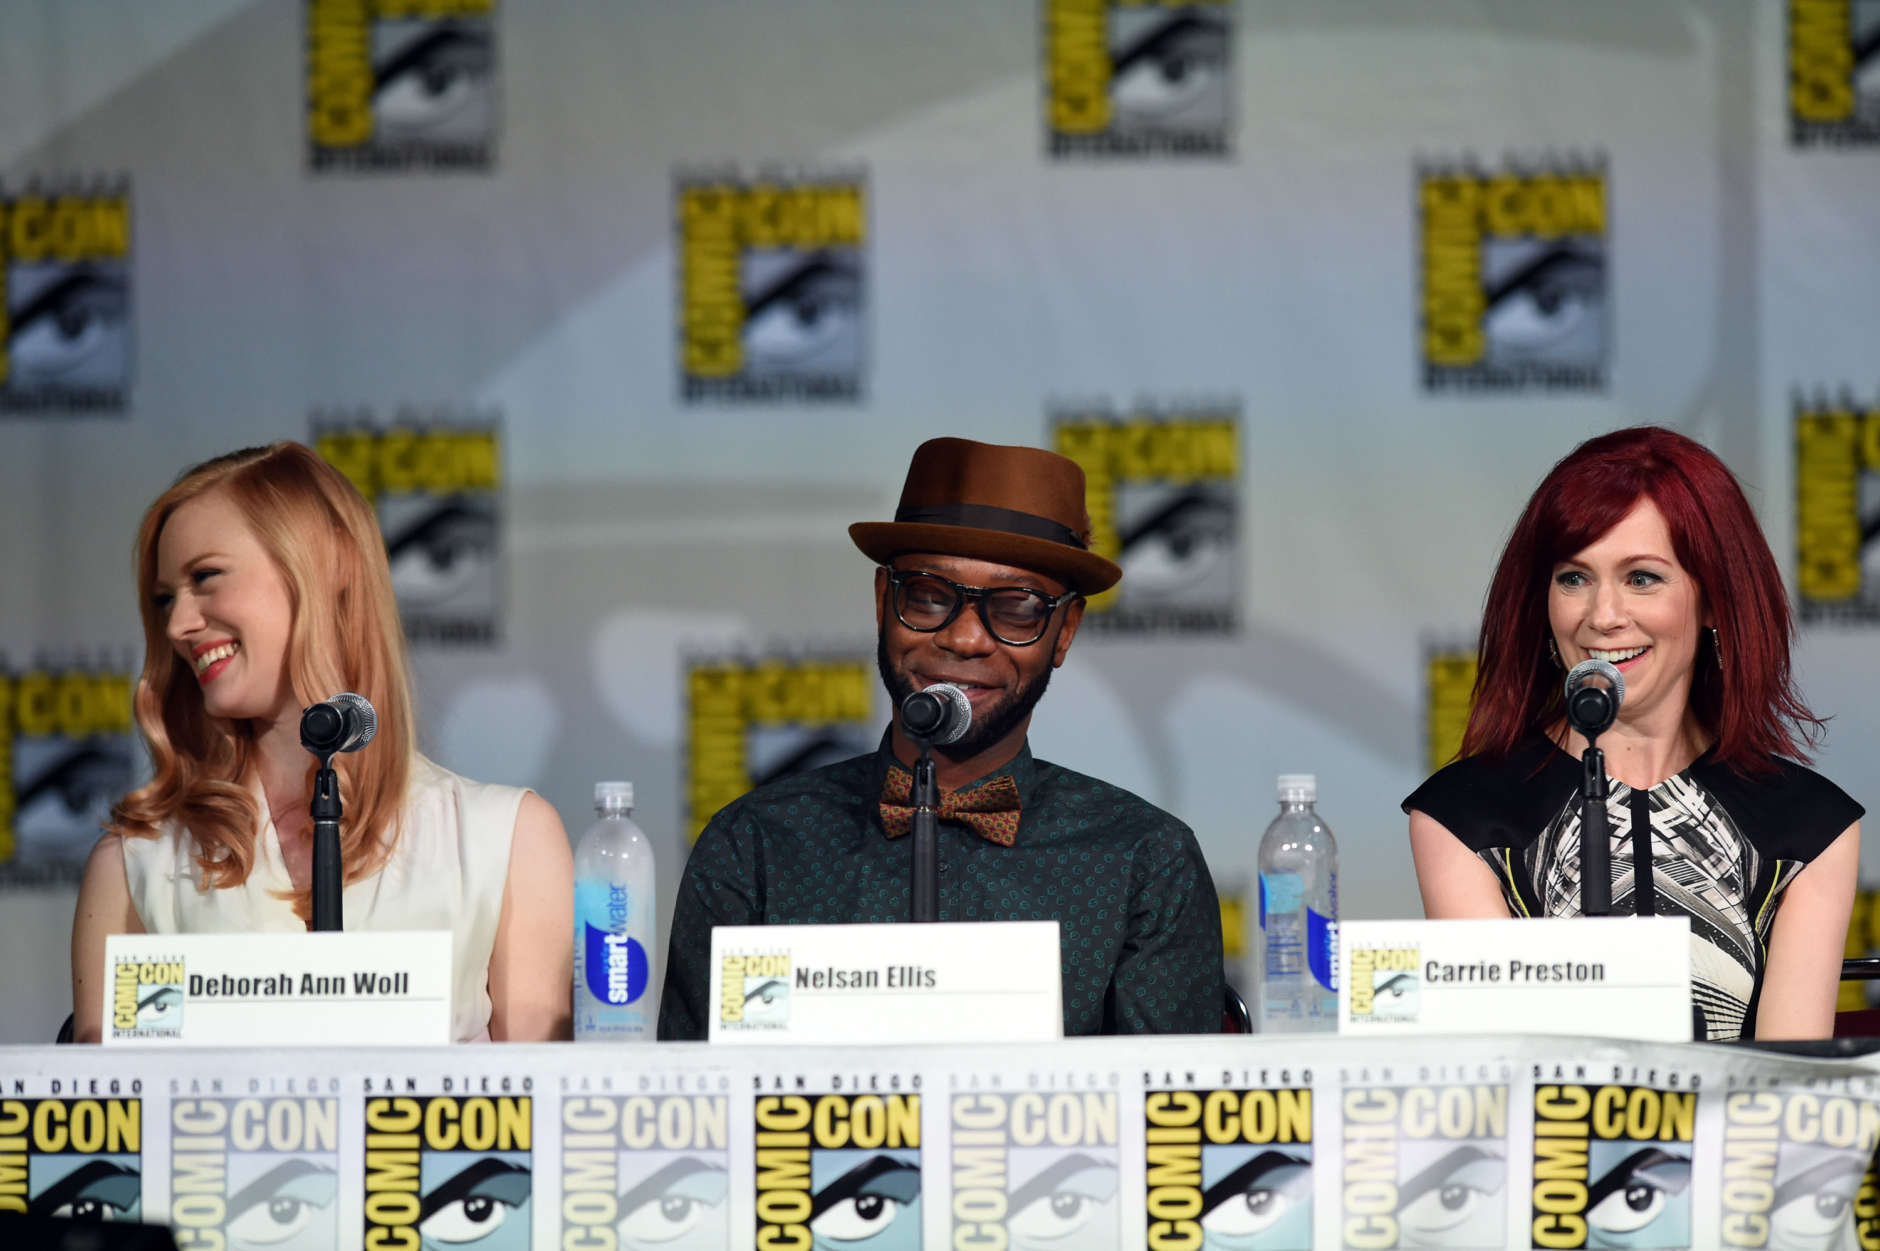 SAN DIEGO, CA - JULY 26:  (L-R) Actors Deborah Ann Woll, Nelsan Ellis and Carrie Preston attend HBO's "True Blood" panel during Comic-Con International 2014 at San Diego Convention Center on July 26, 2014 in San Diego, California.  (Photo by Ethan Miller/Getty Images)